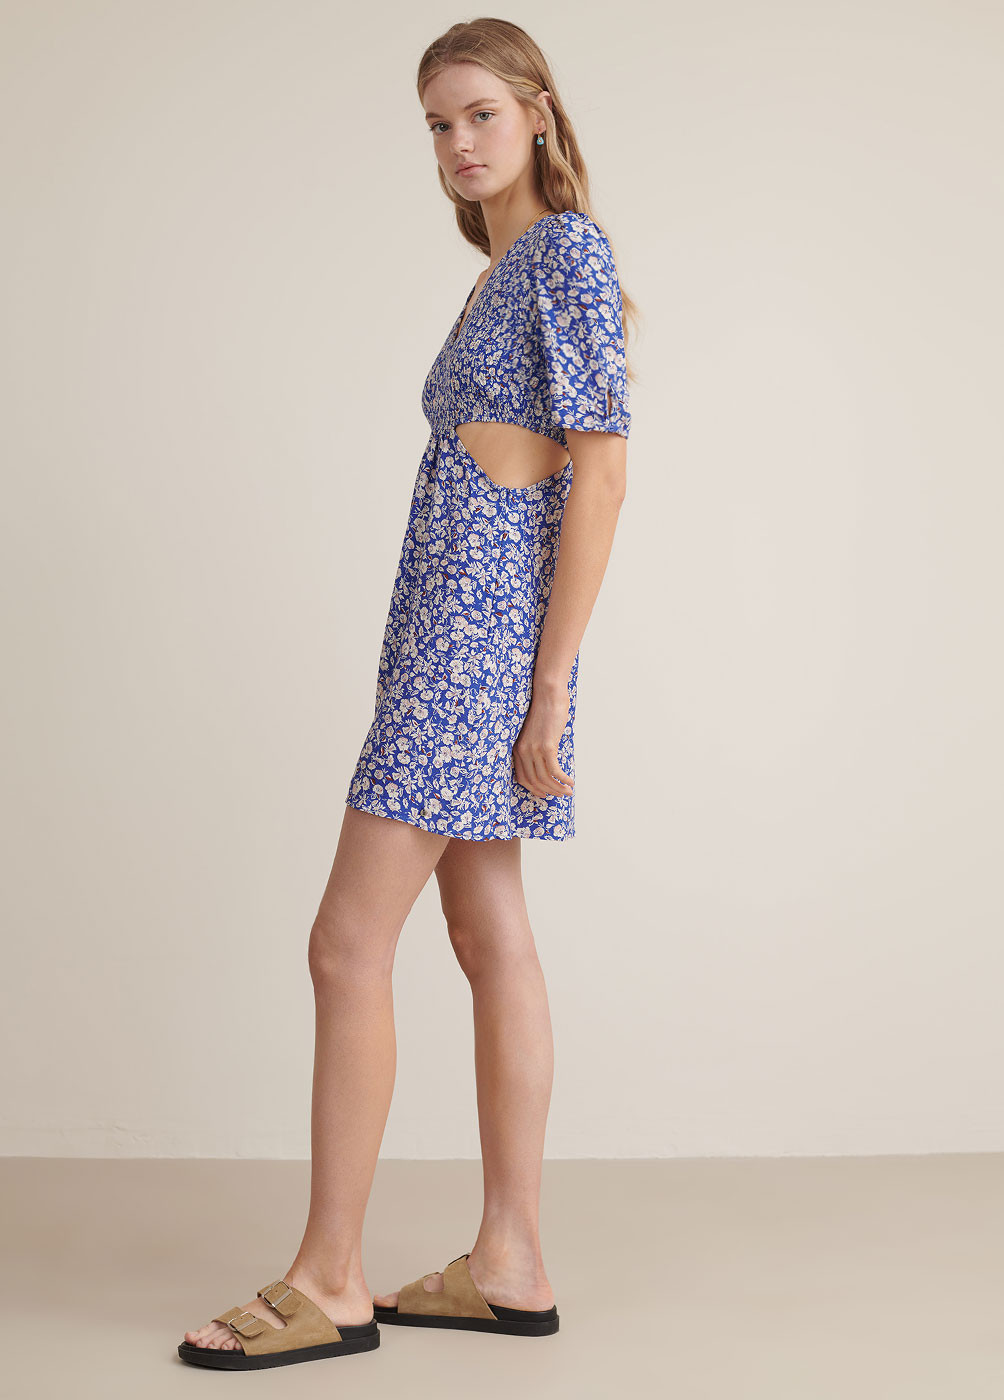 SPRING CUT-OUT DETAIL PRINTED DRESS